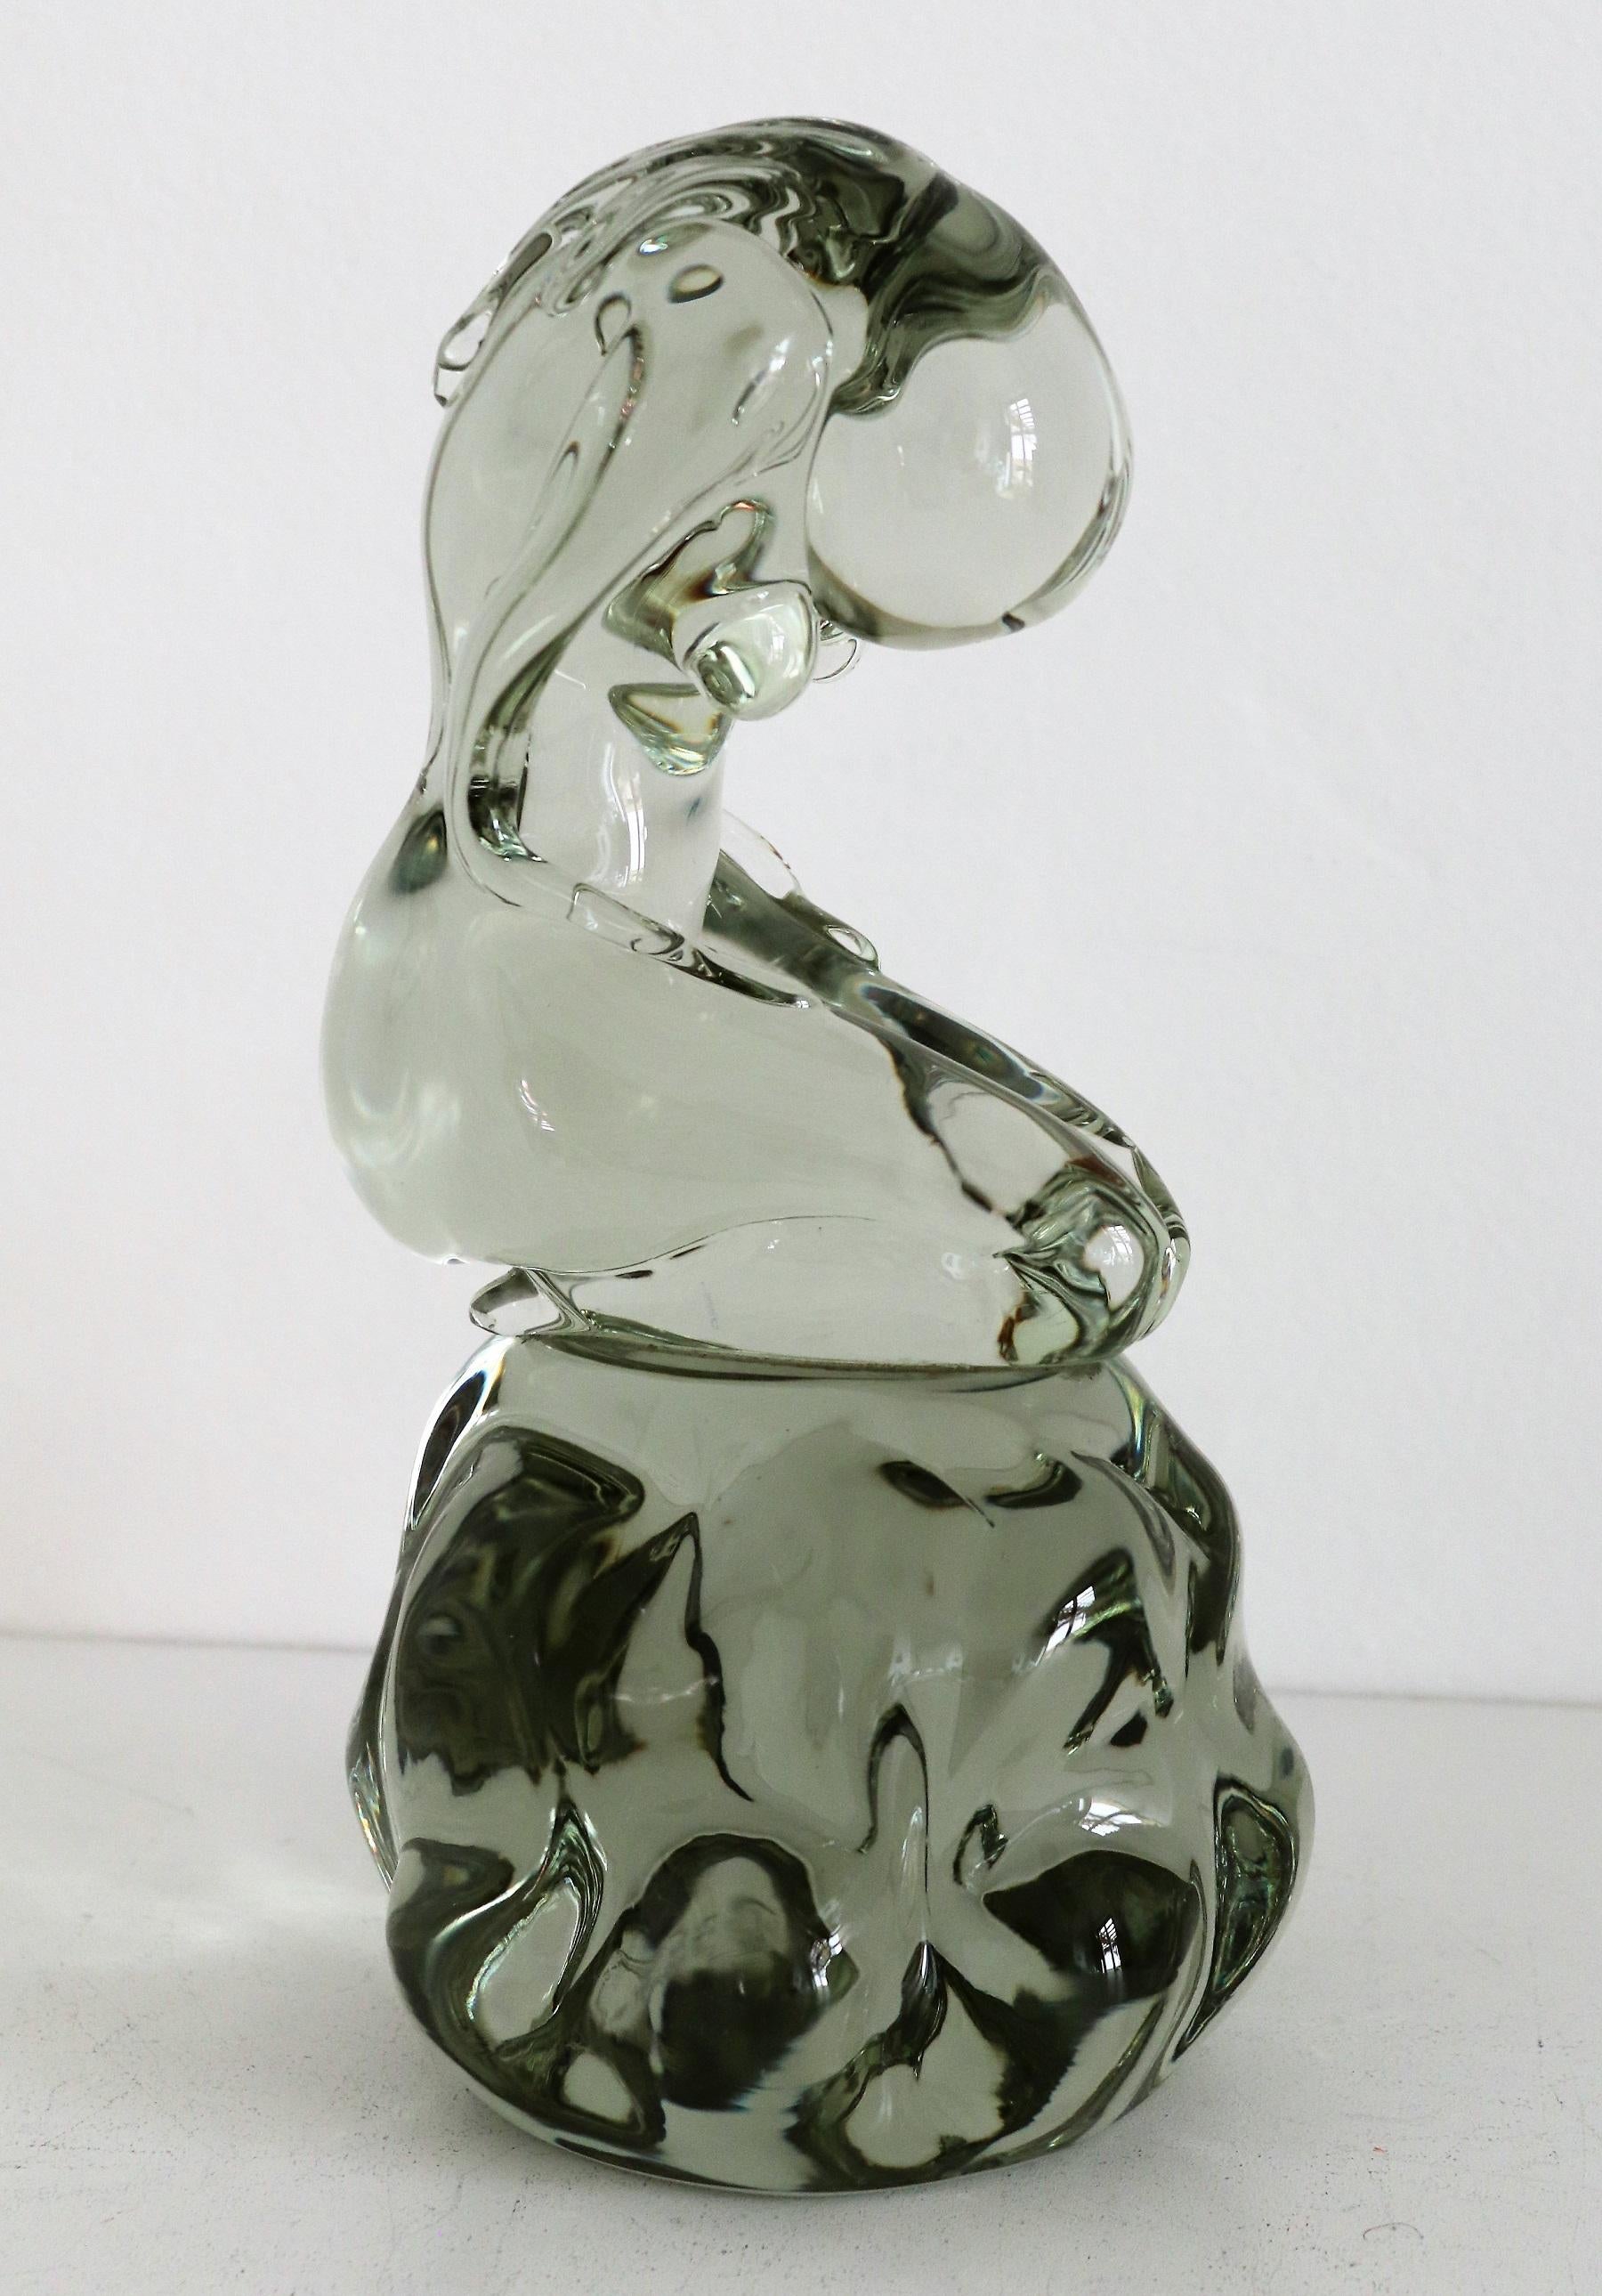 Beautiful glass sculpture made by Italian Murano Glass Master Pino Signoretto during the 1980s.
The sculpture shows a woman with long hair, kneeling, with her head bowed. Her arms are resting on her legs.
The sculpture is signed with Pino Signoretto